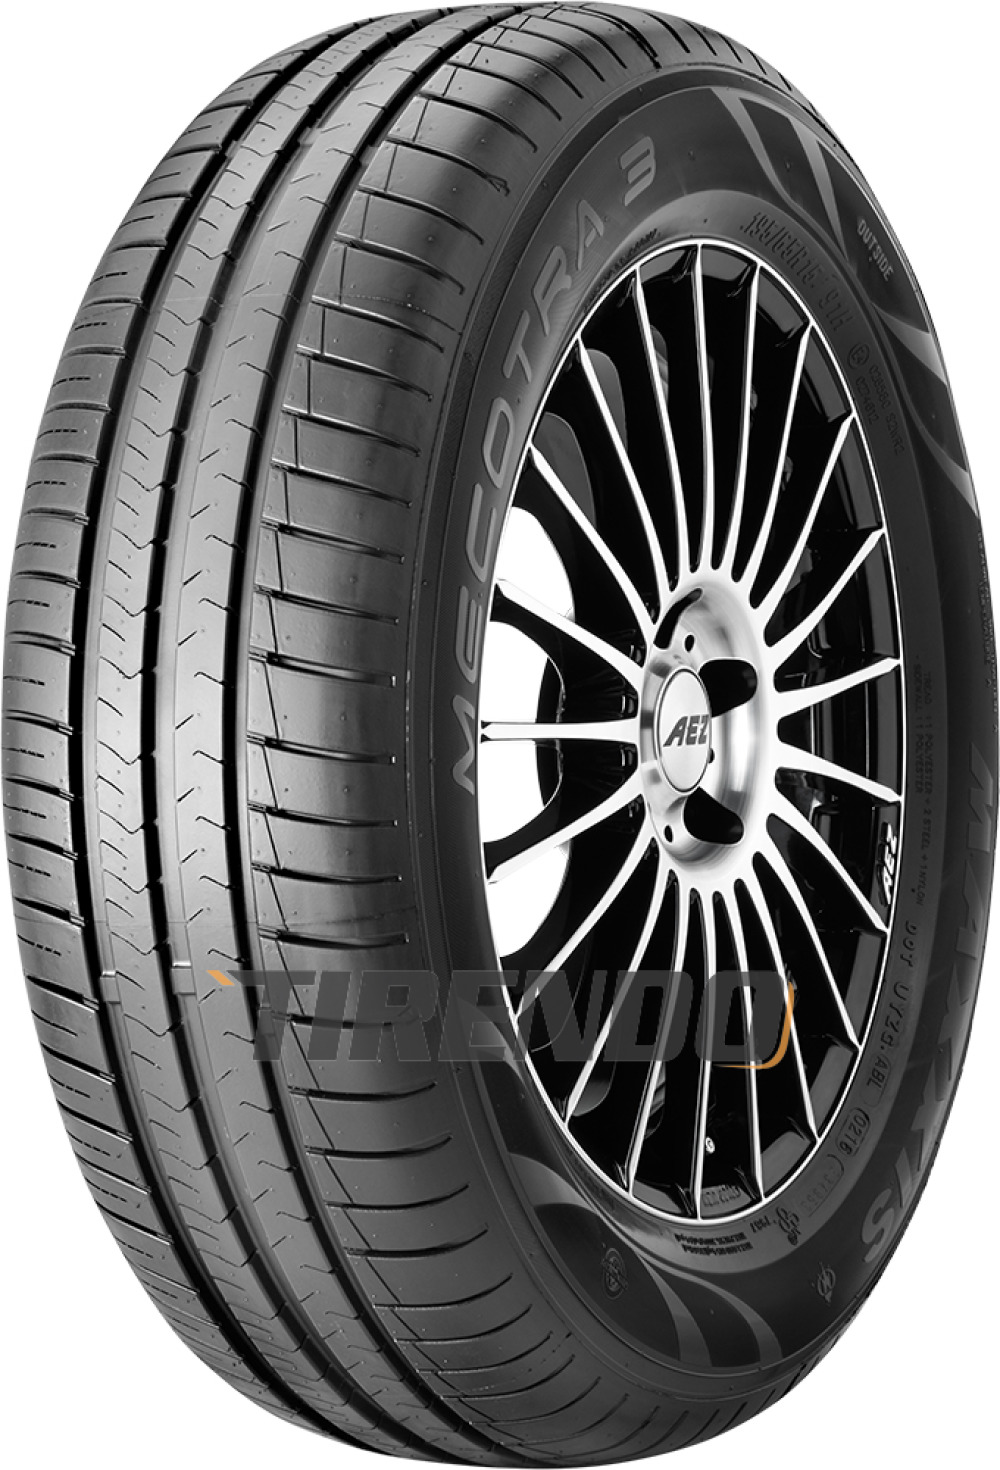 Maxxis Mecotra 3 ( 185/65 R15 88T ) von Maxxis